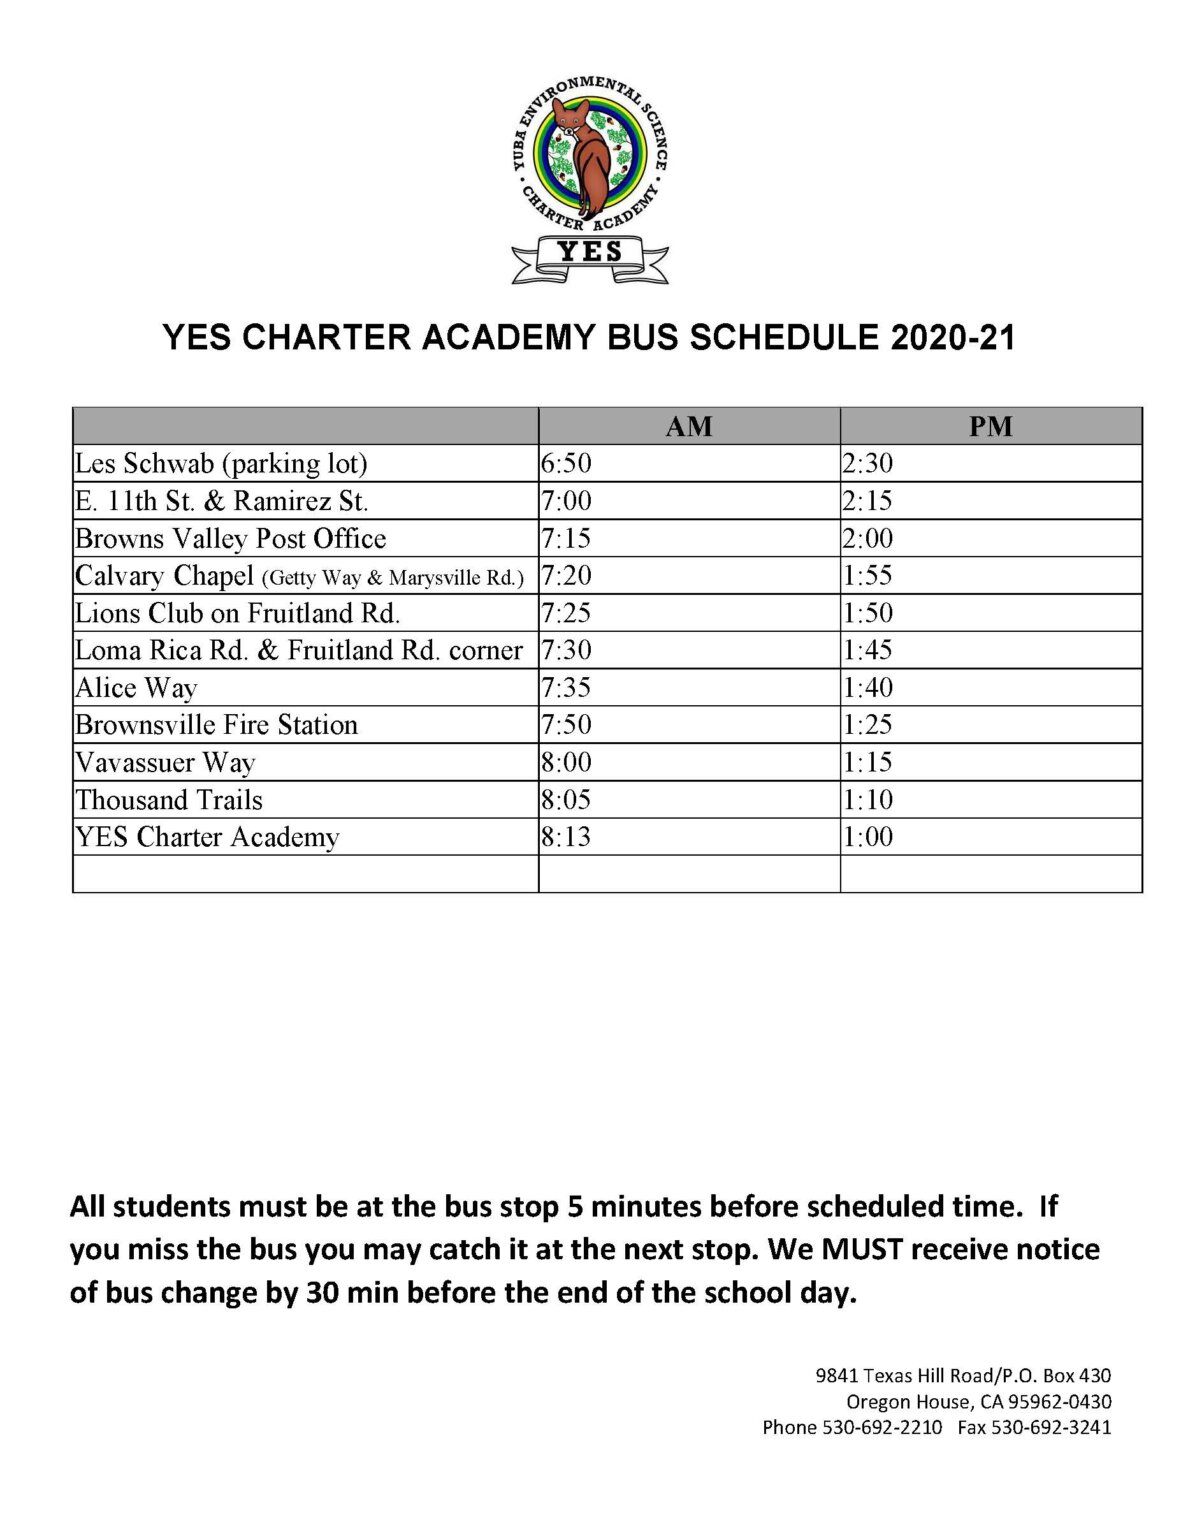 Bus Schedule YES Charter Academy